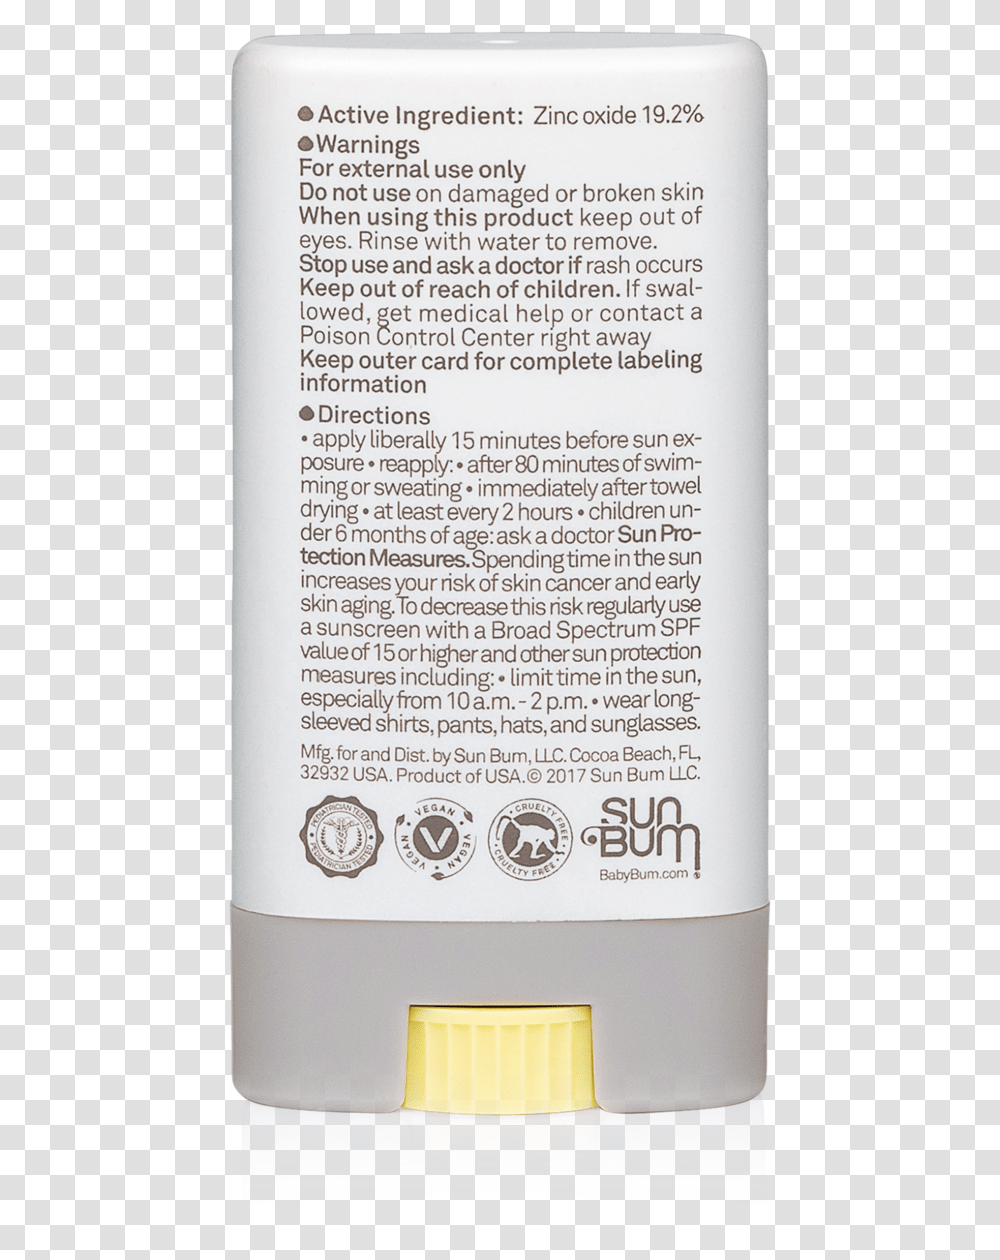 Baby Bum Sunscreen 50 Spf Ingredients, Book, Letter, Page Transparent Png